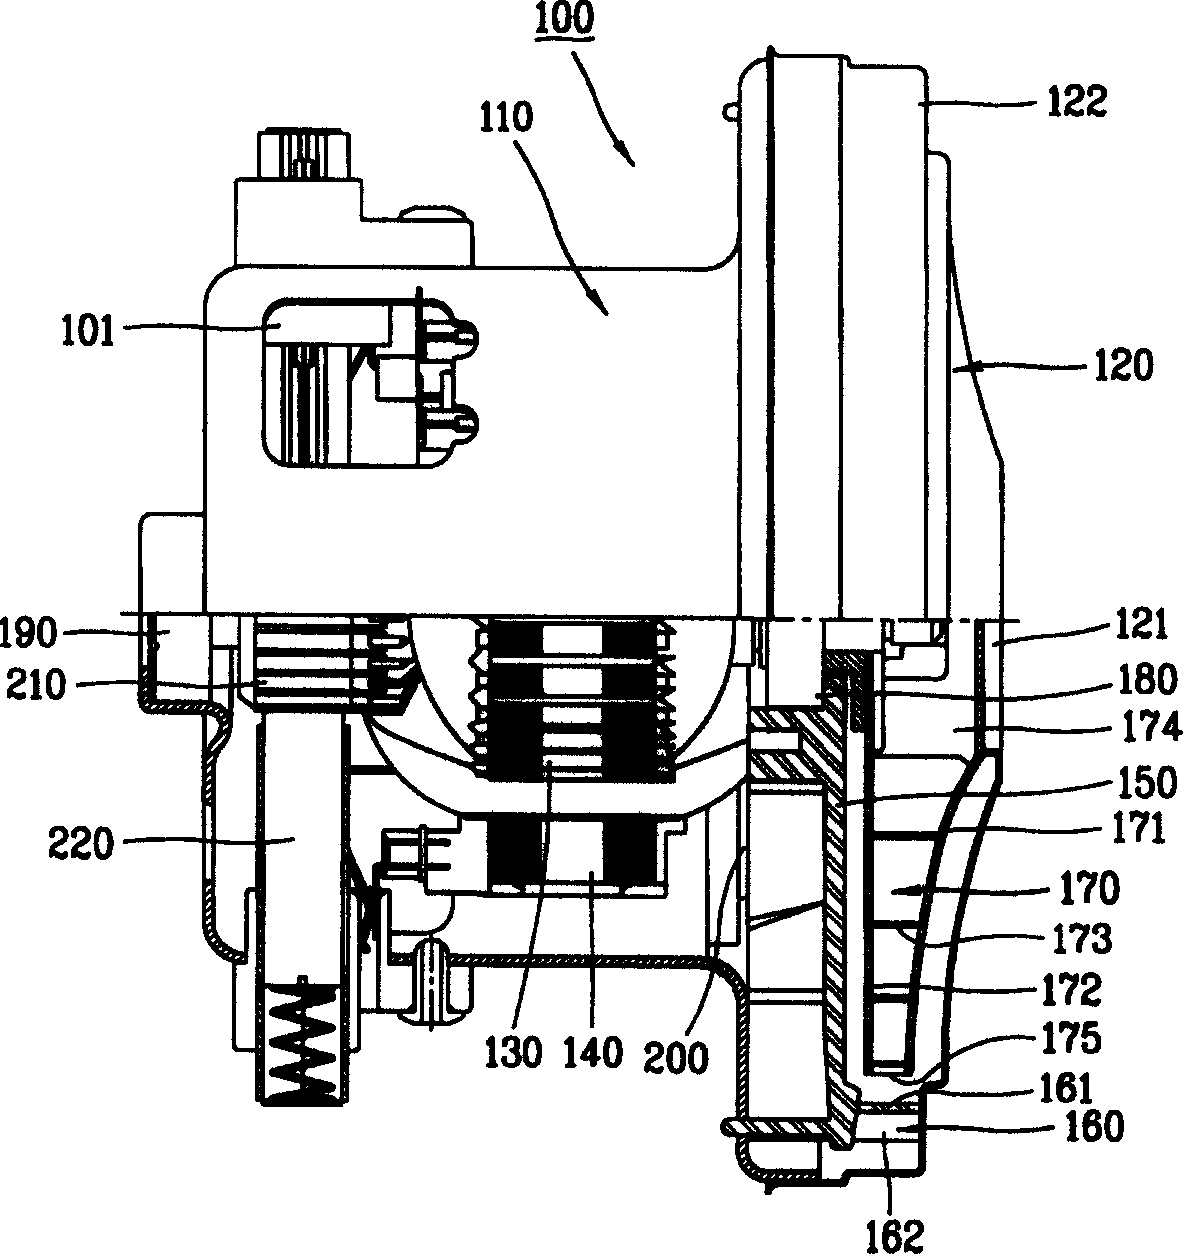 Structure for reducing resonance noise of external shell of fan for motor of vaccum dust collector